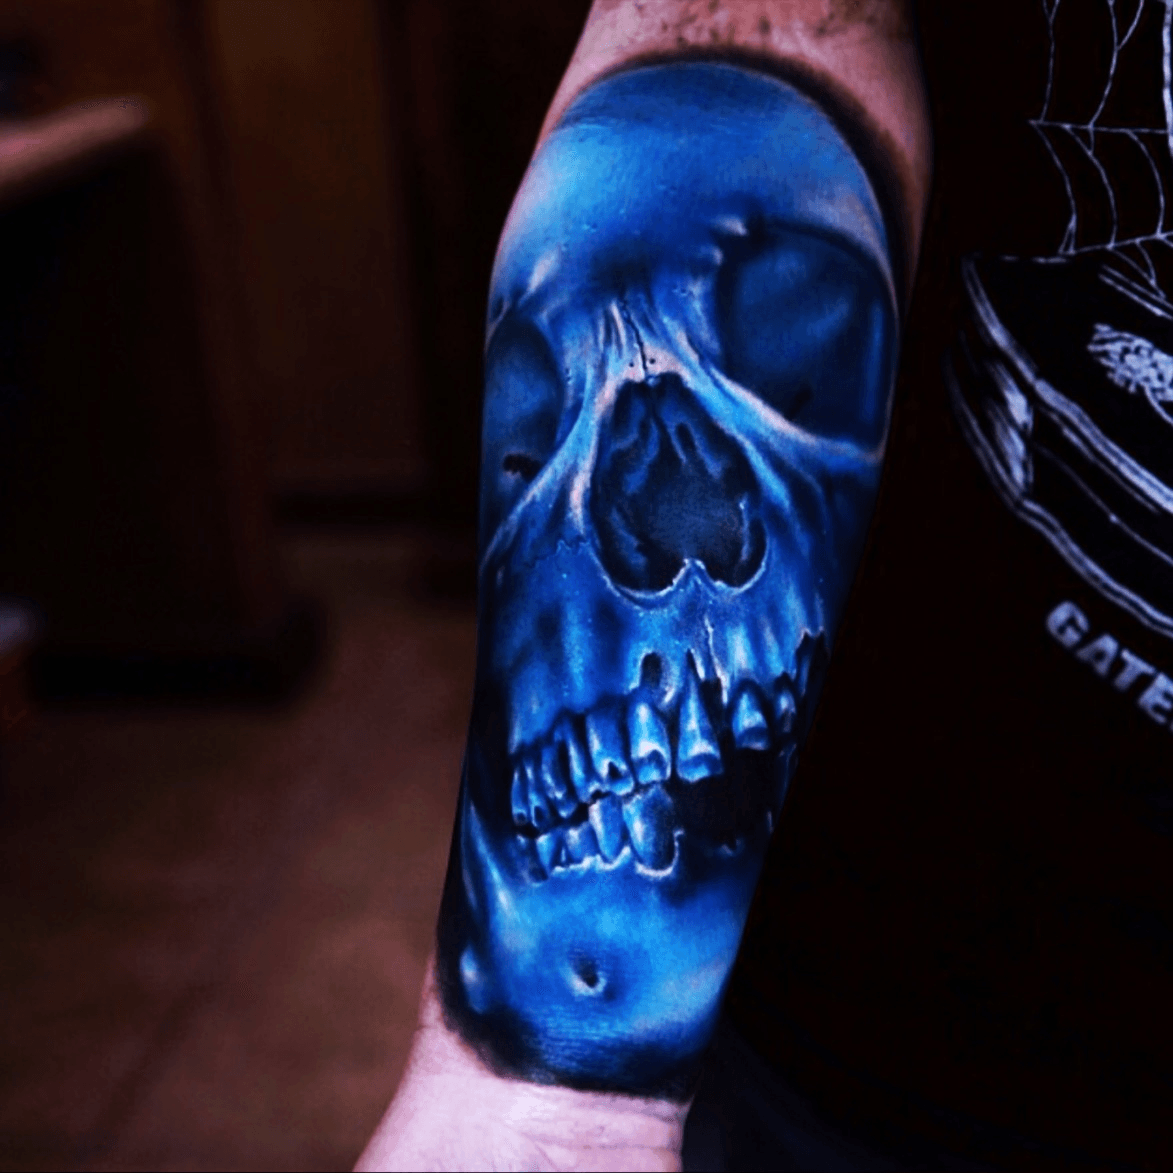 Cadillac Custom Tattoo  Piercing  Glowing skull tattoo on the hand  Customer had seen a tattoo like this online so we made some changes to  personalize it and had a great